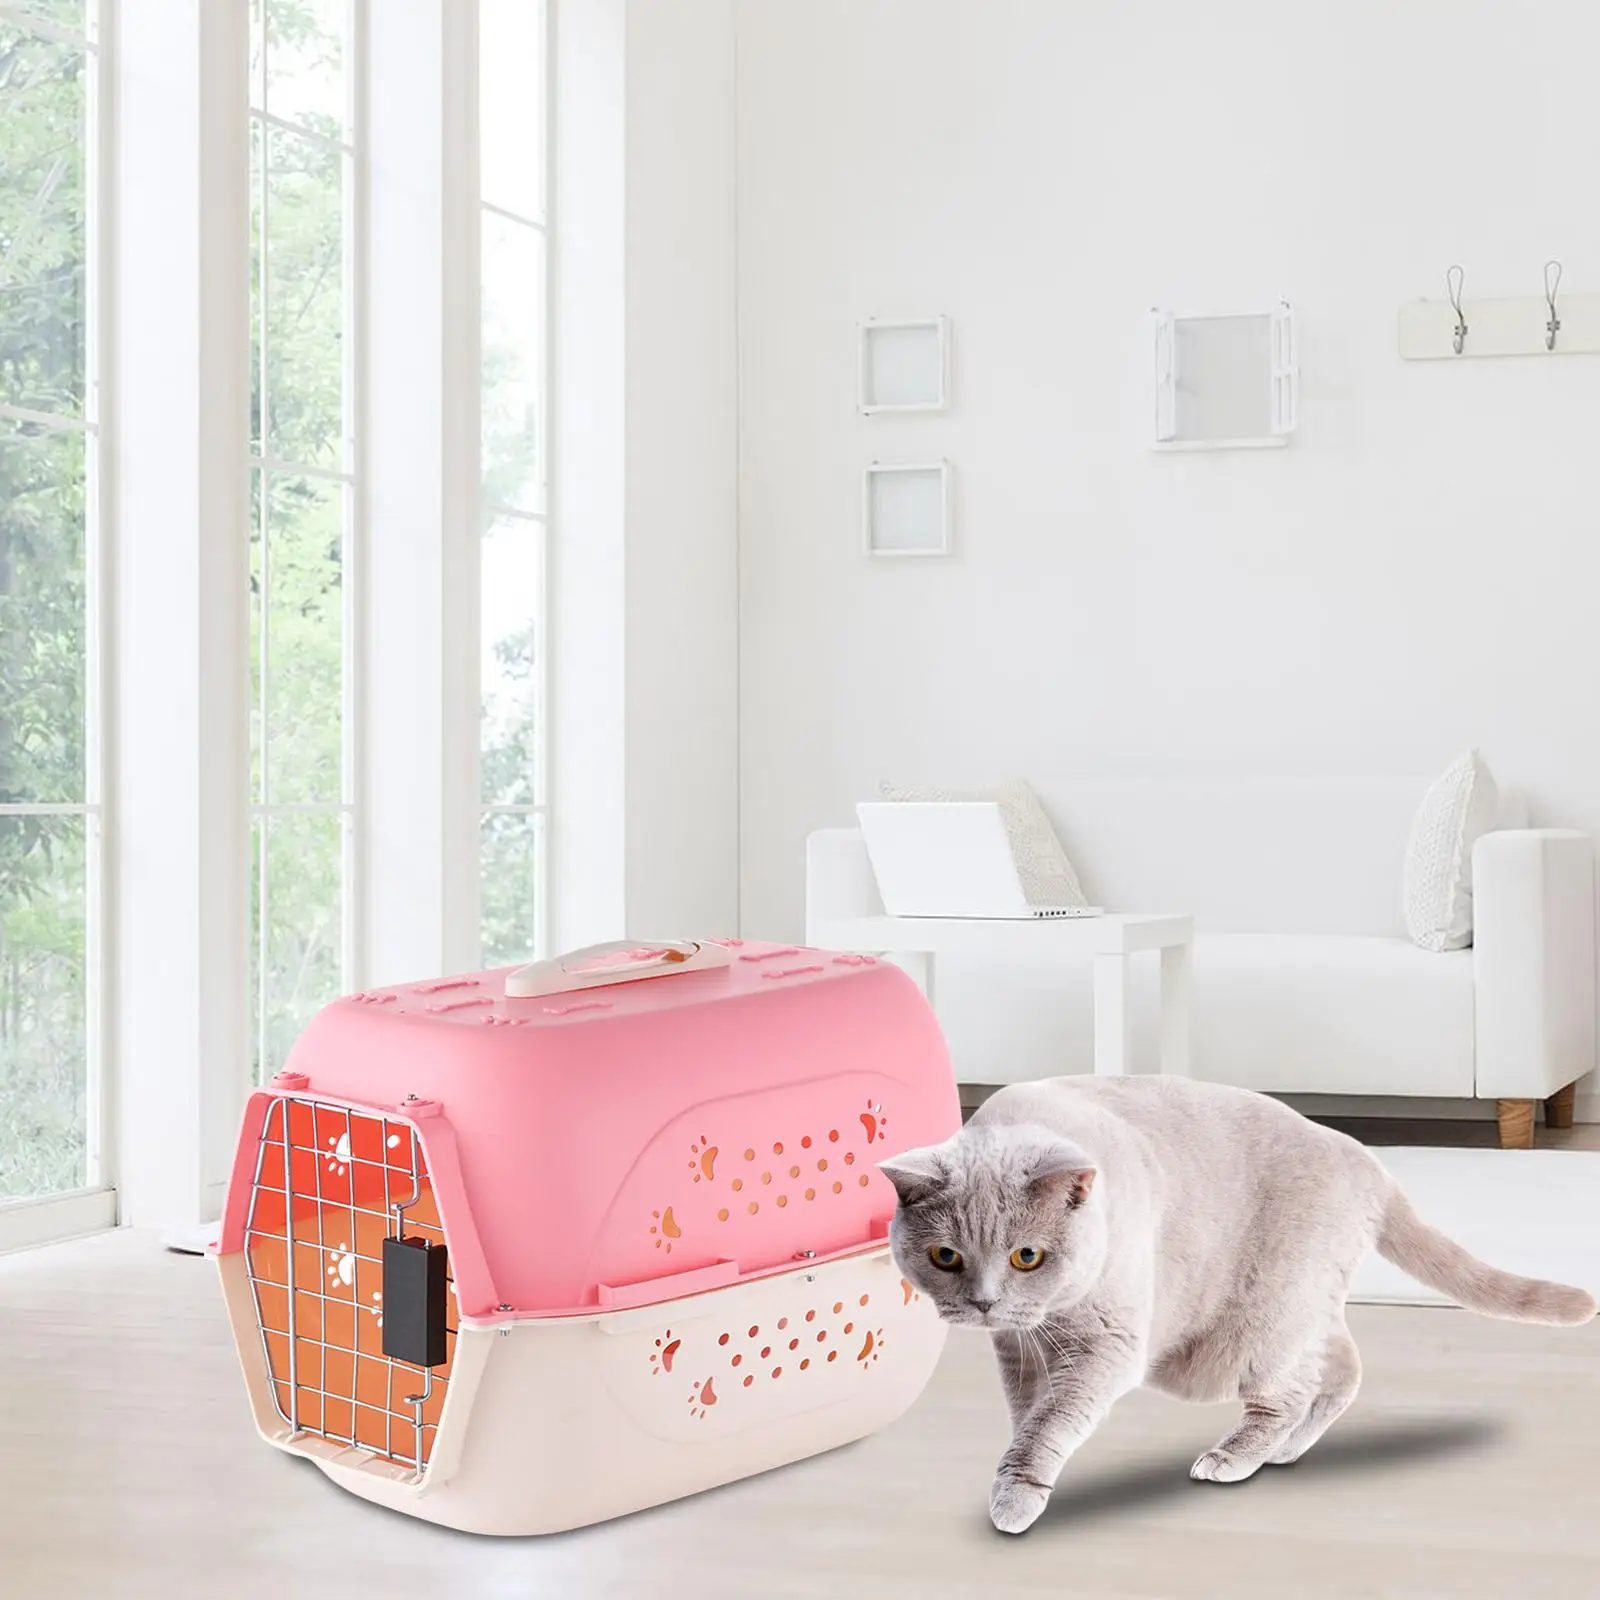 Portable Cat Cage Airline Carrying Case Nest Pet Supplies Hard Sided Travel Carrier for Rabbits Hiking Sightseeing Outdoor